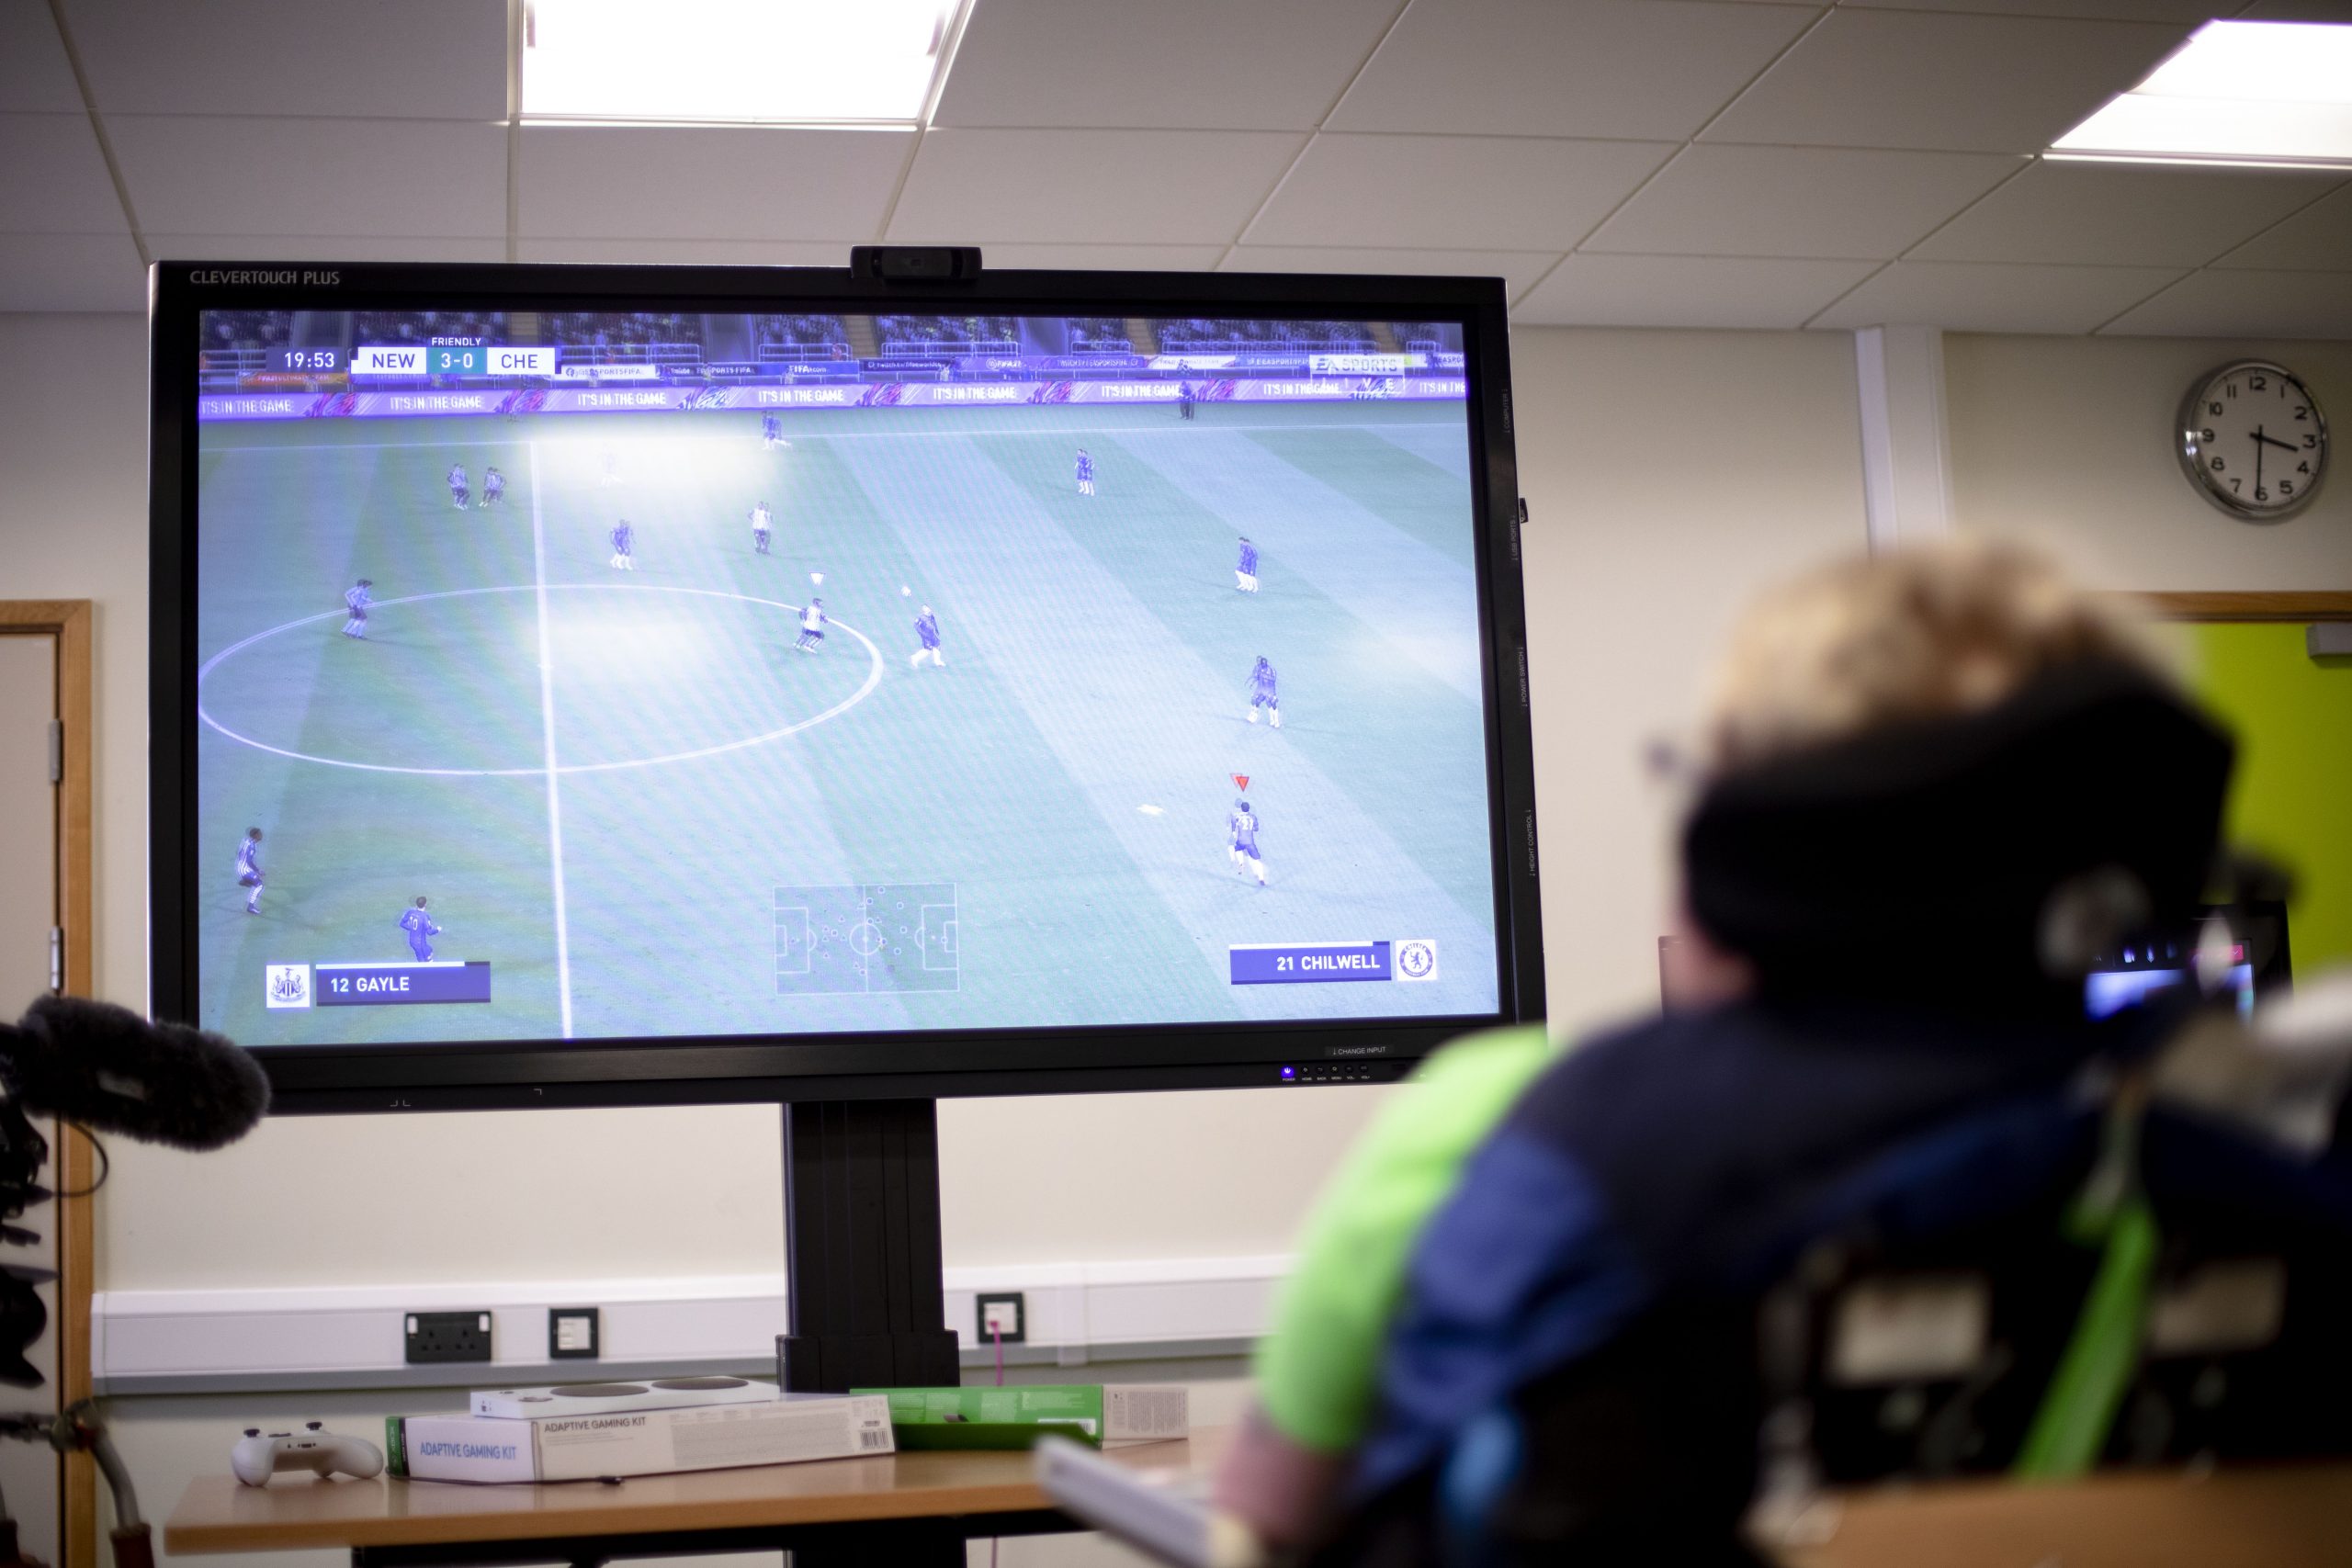 A student at National Star plays FIFA on an Xbox